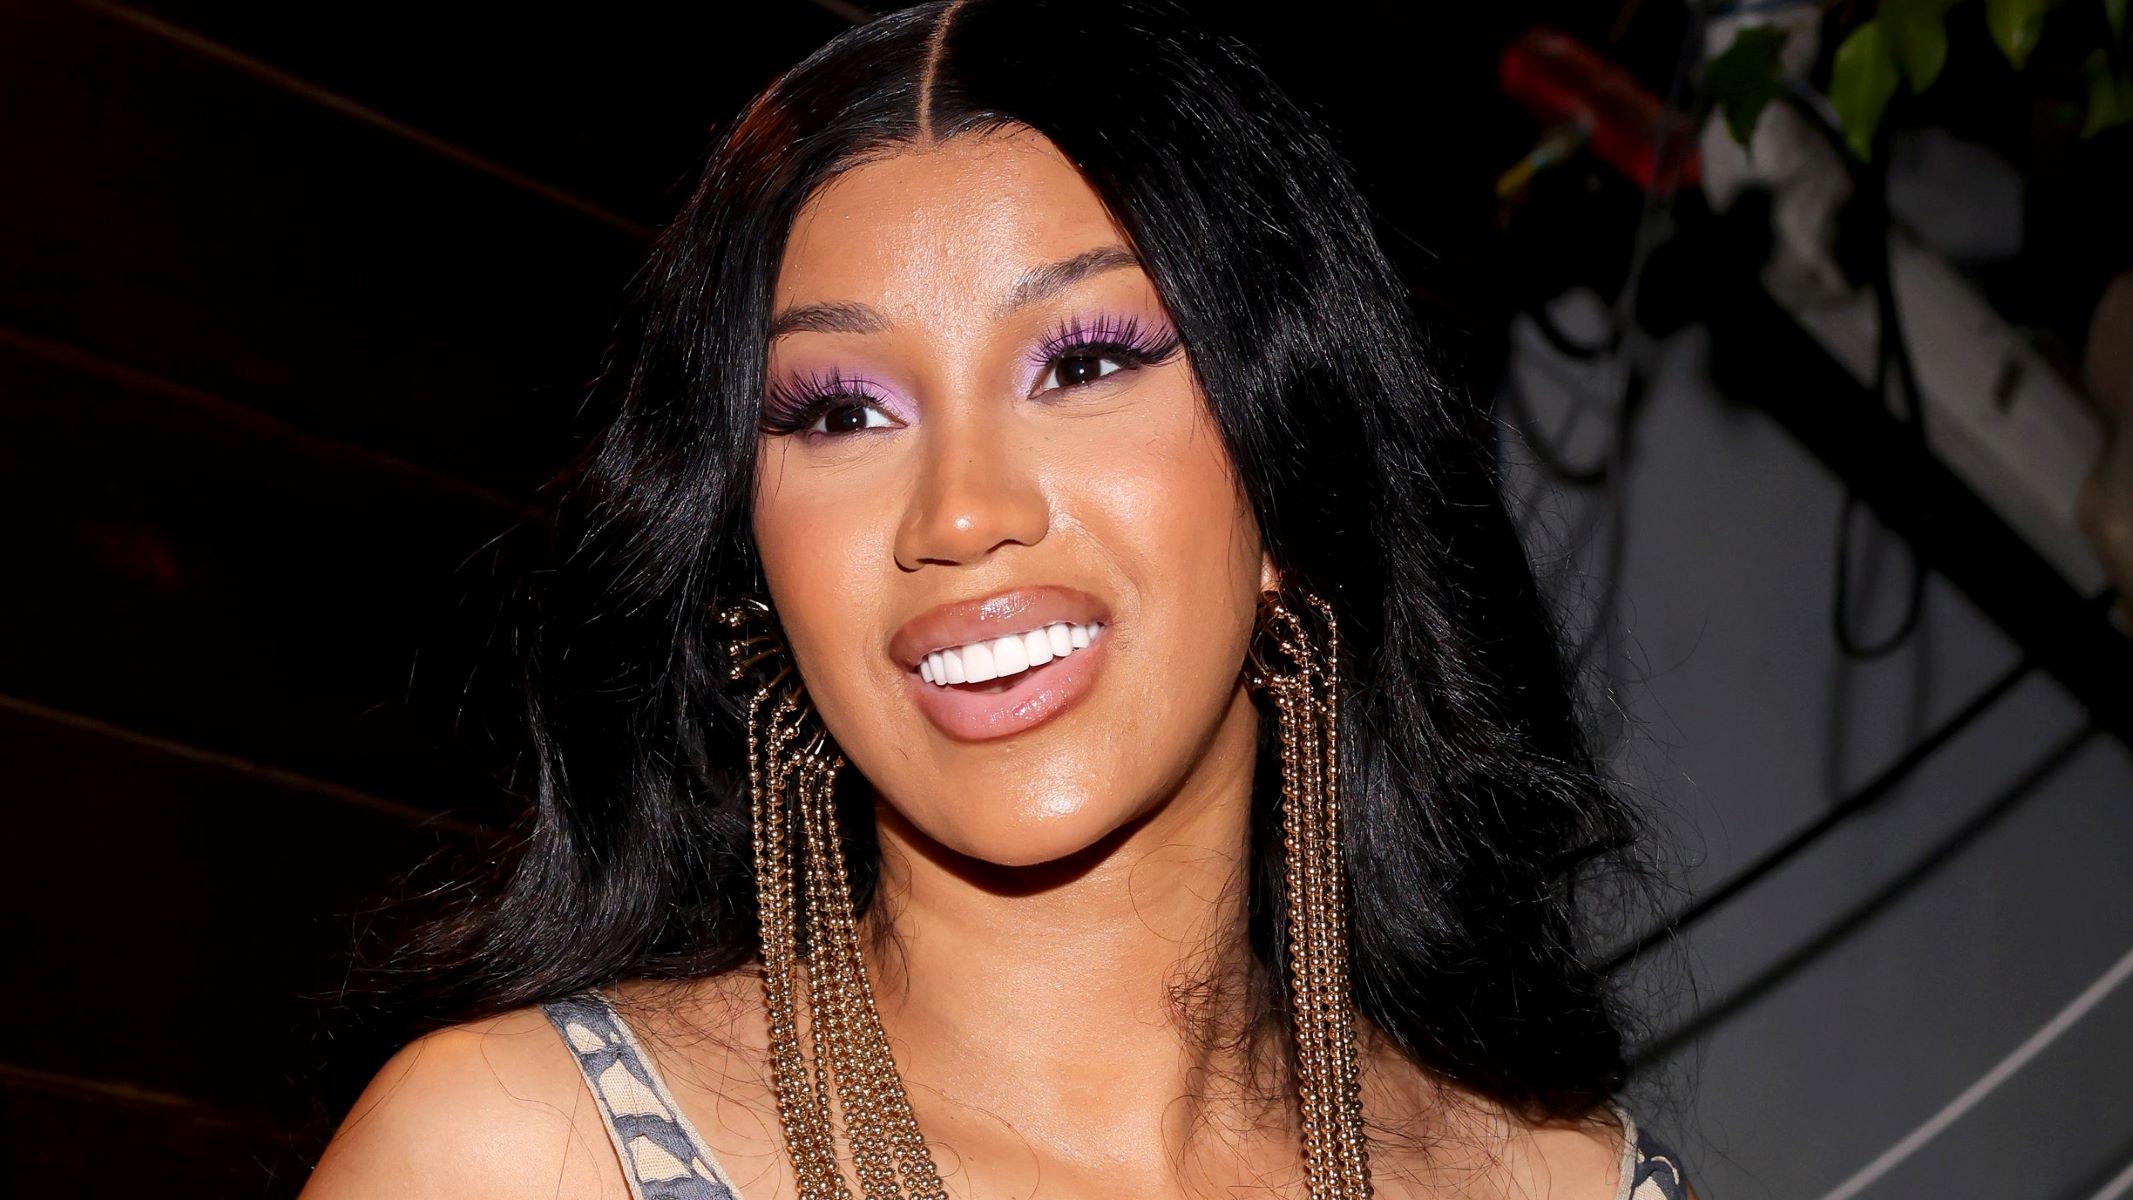 cardi-b-enjoys-offsets-24-hour-live-stream-expresses-interest-in-knowing-his-every-move